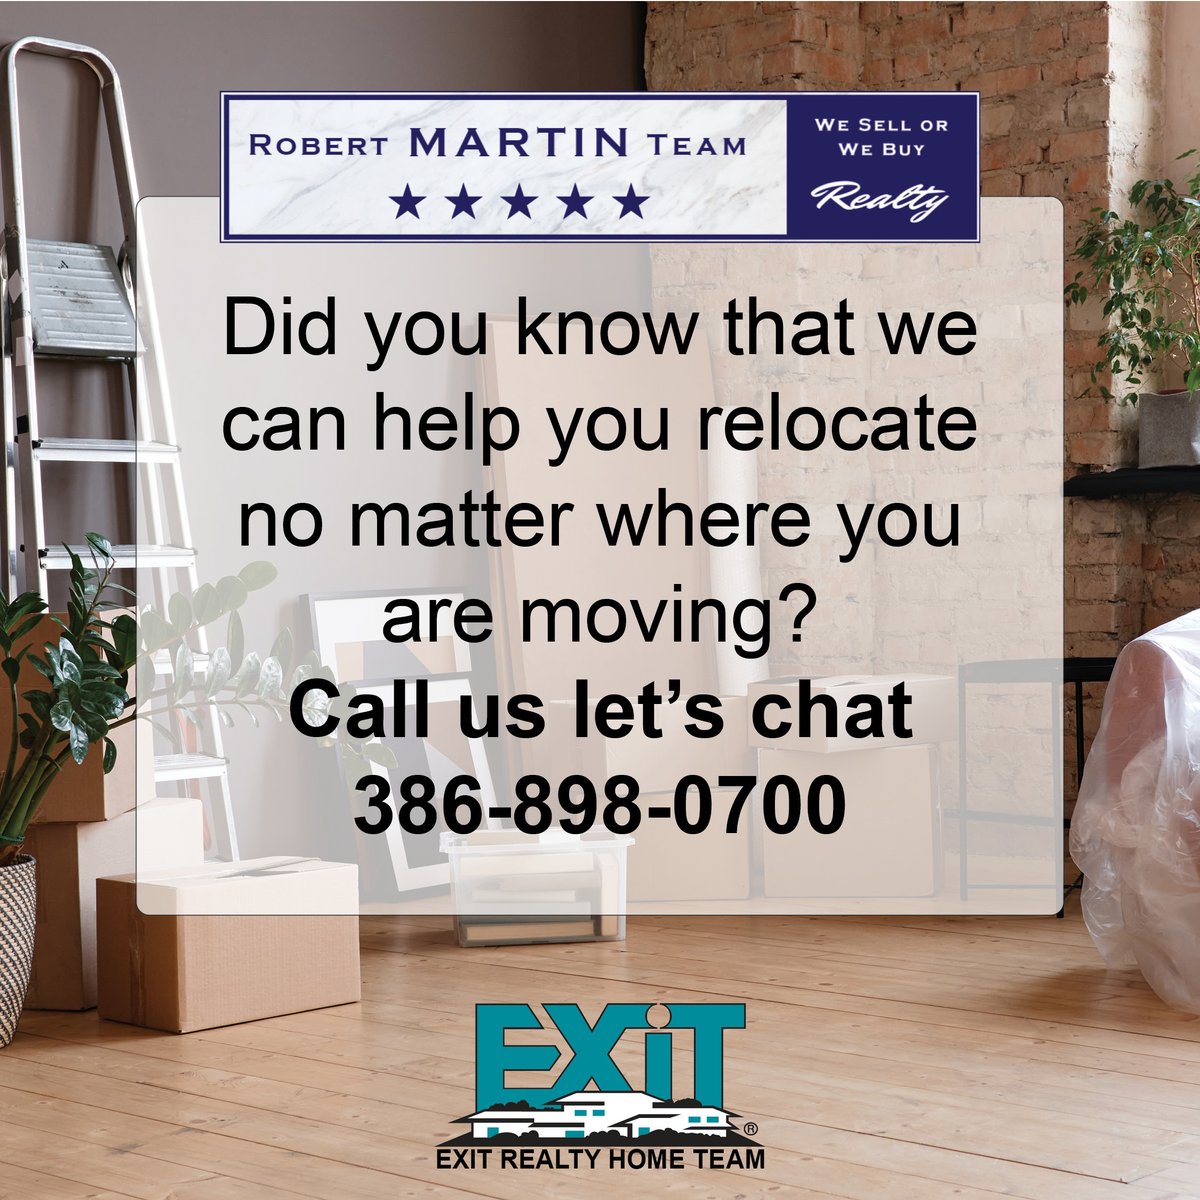 We can help you relocate no matter where you're moving!
Call or text 386-898-0700 today - we're ready to get to work for you.

#EXITRealtyHomeTeam #DaytonaBeachHomes #DaytonaBeaachRealEstate #HomesForSale #LuxuryHomes #WaterfrontHomes #LovEXIT #EXITRealty #curbappeal...